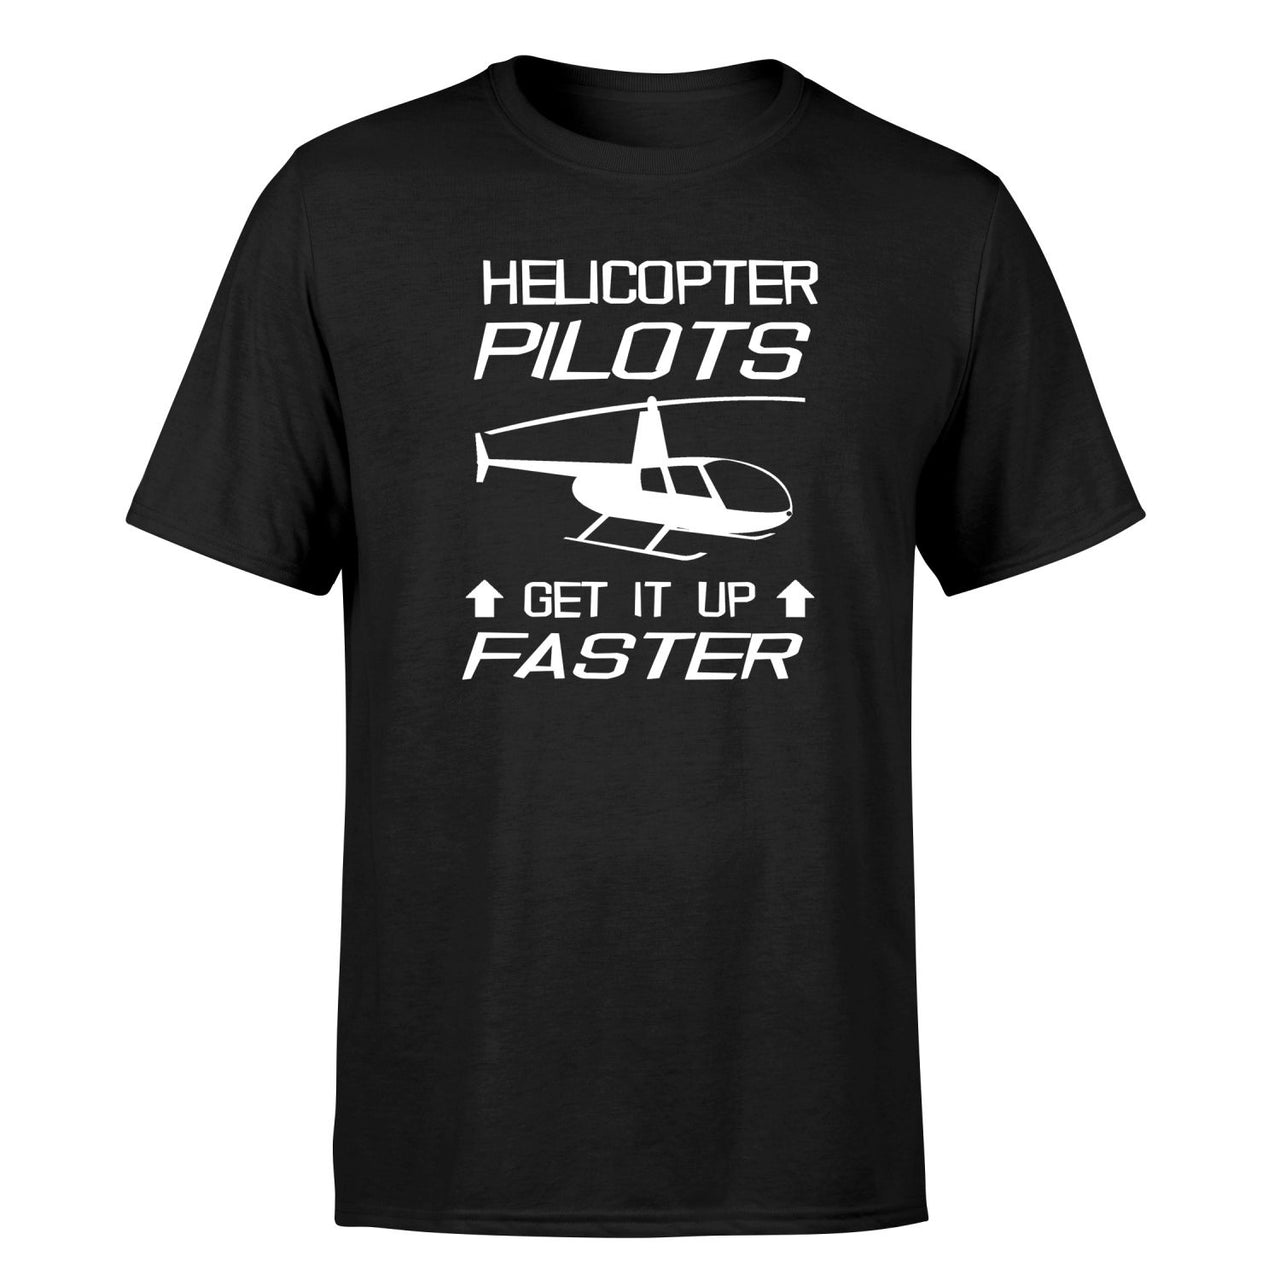 Helicopter Pilots Get It Up Faster Designed T-Shirts